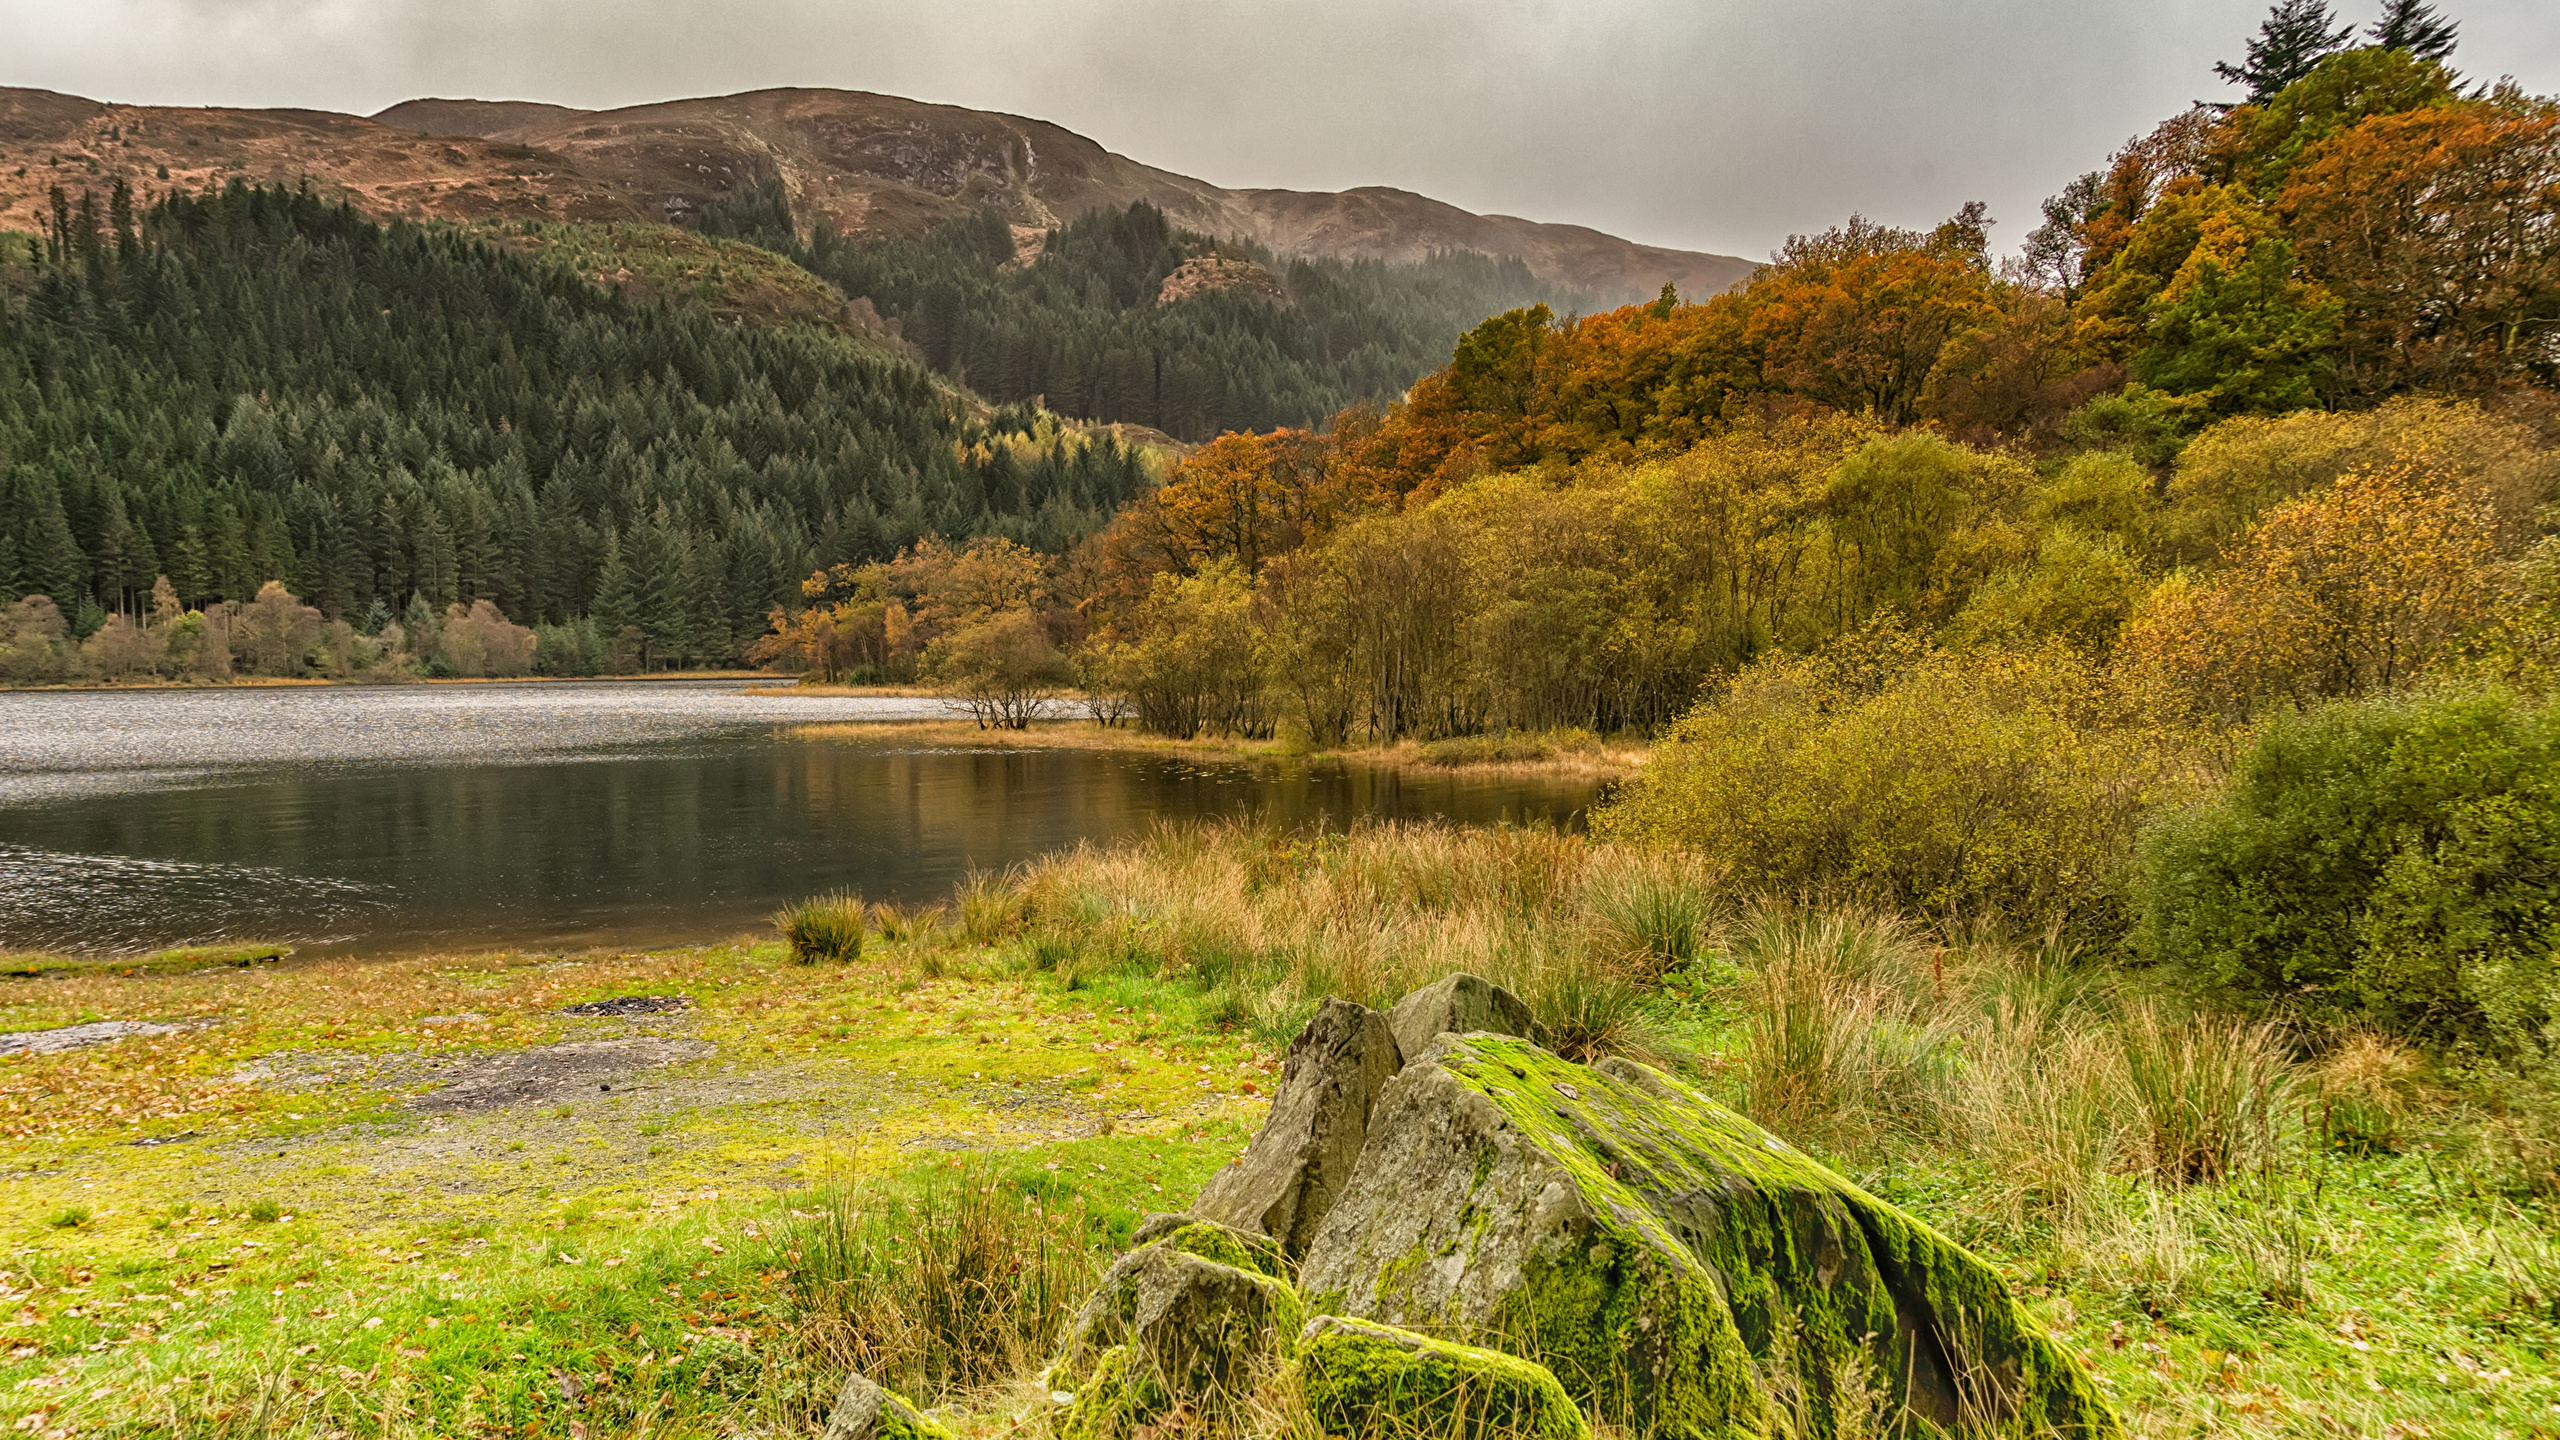 Photos Loch Chon Nature Autumn Hill Lake Forests Moss